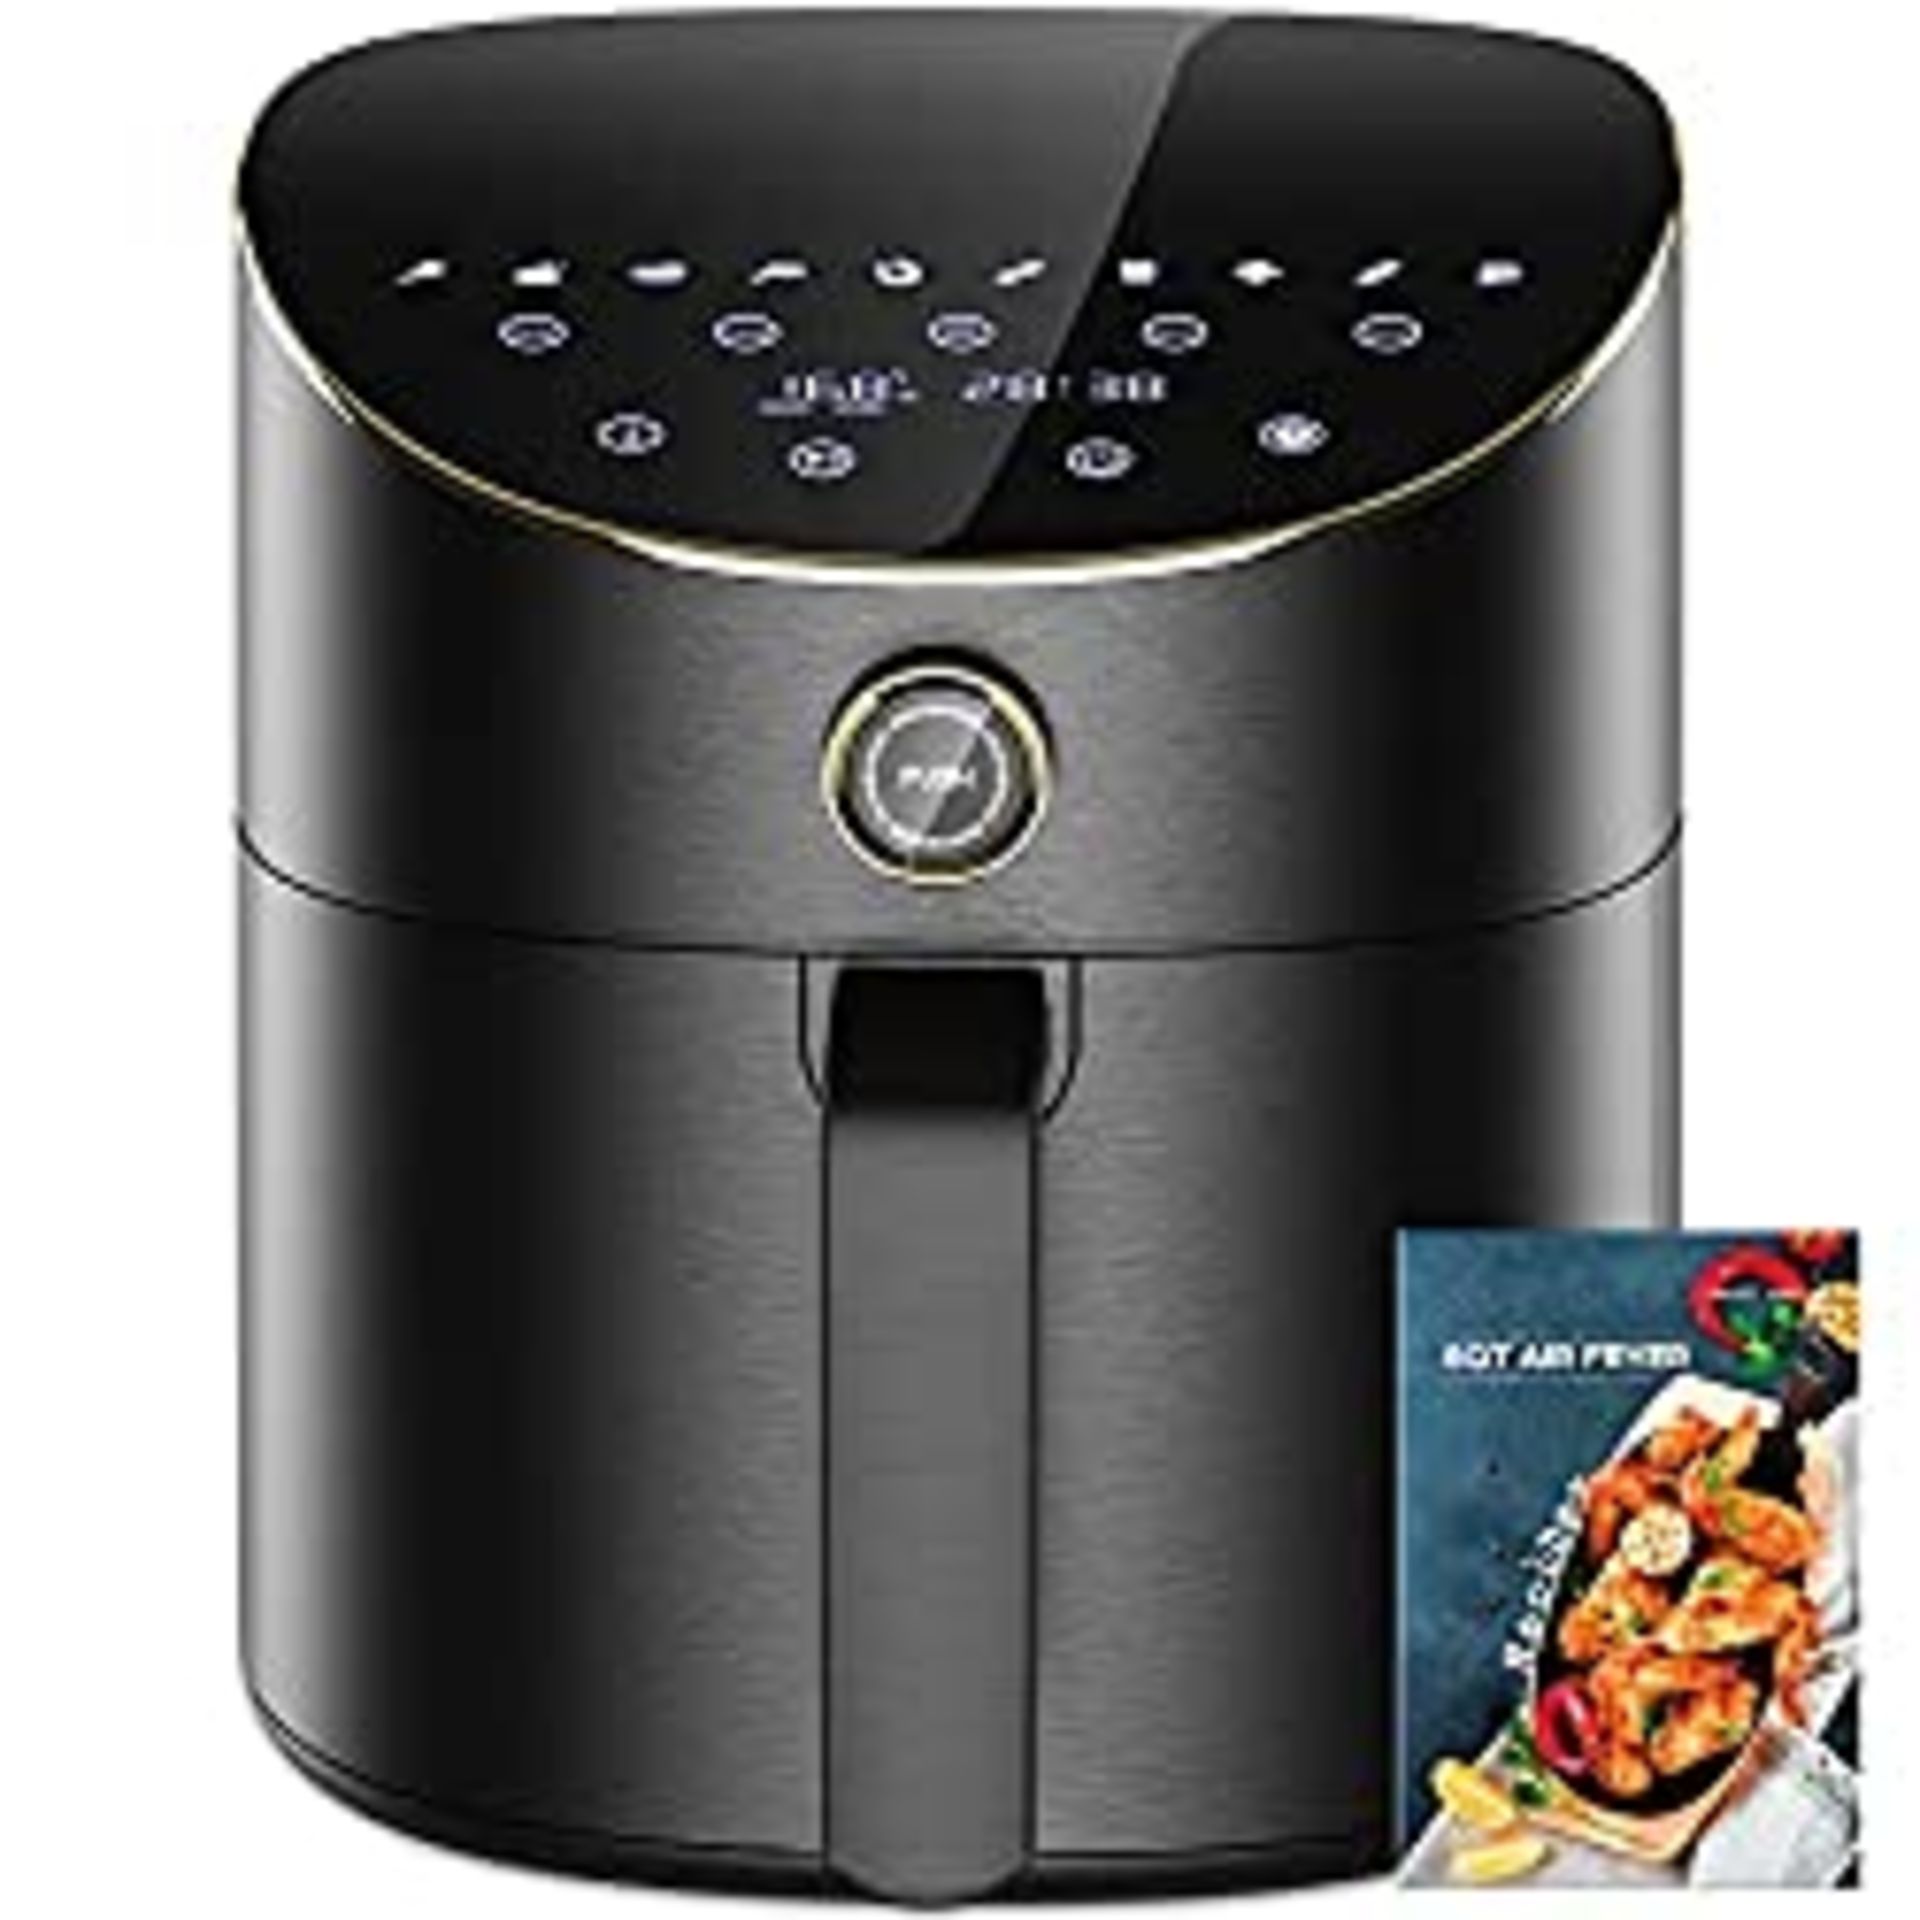 RRP £76.02 Air Fryer 5.5L XXL Airfryers for Home Use with 10 Cooking